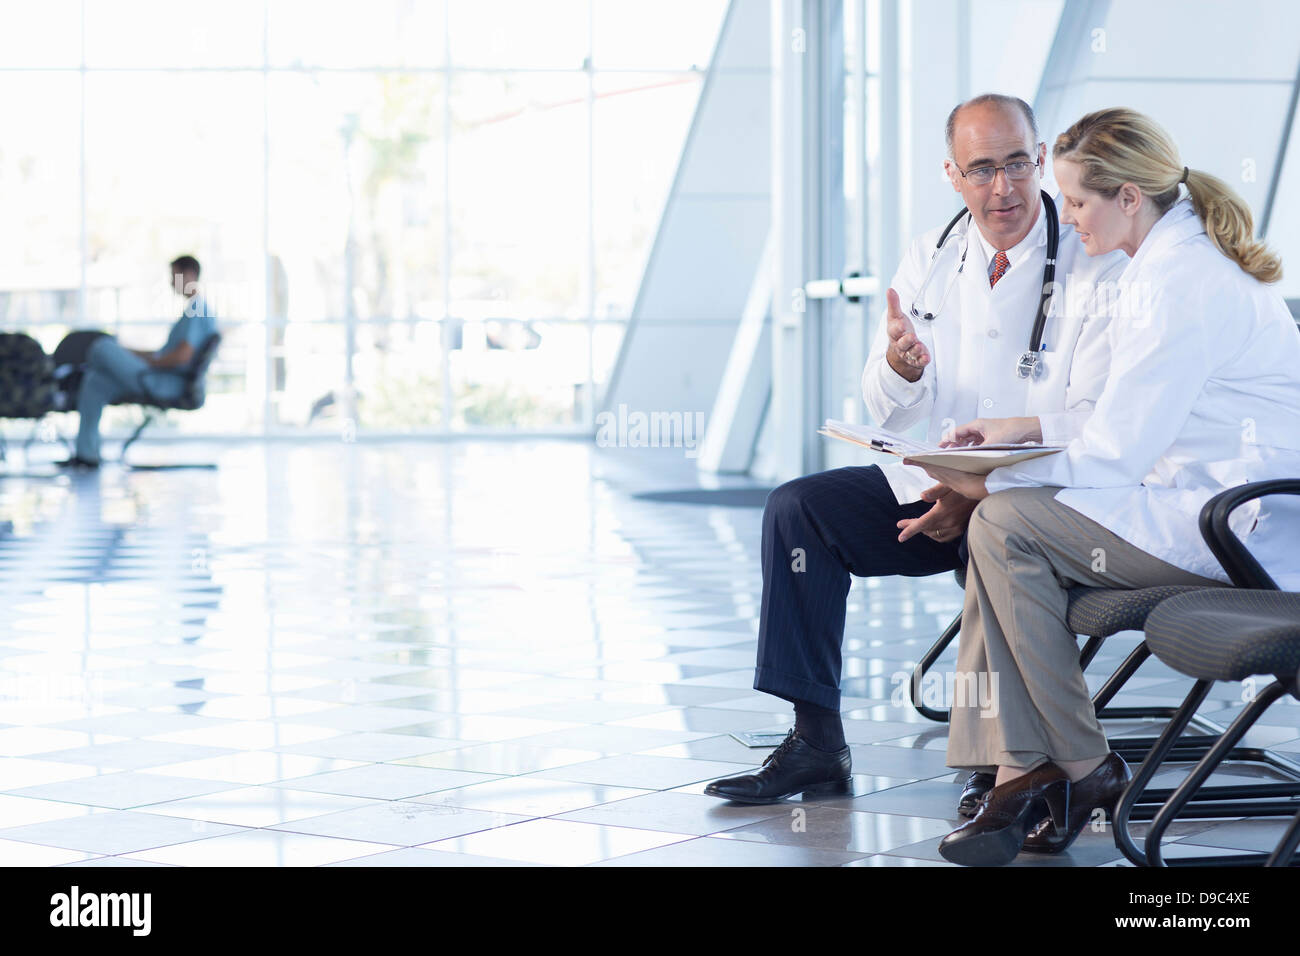 Male and female doctors sitting on chairs Stock Photo